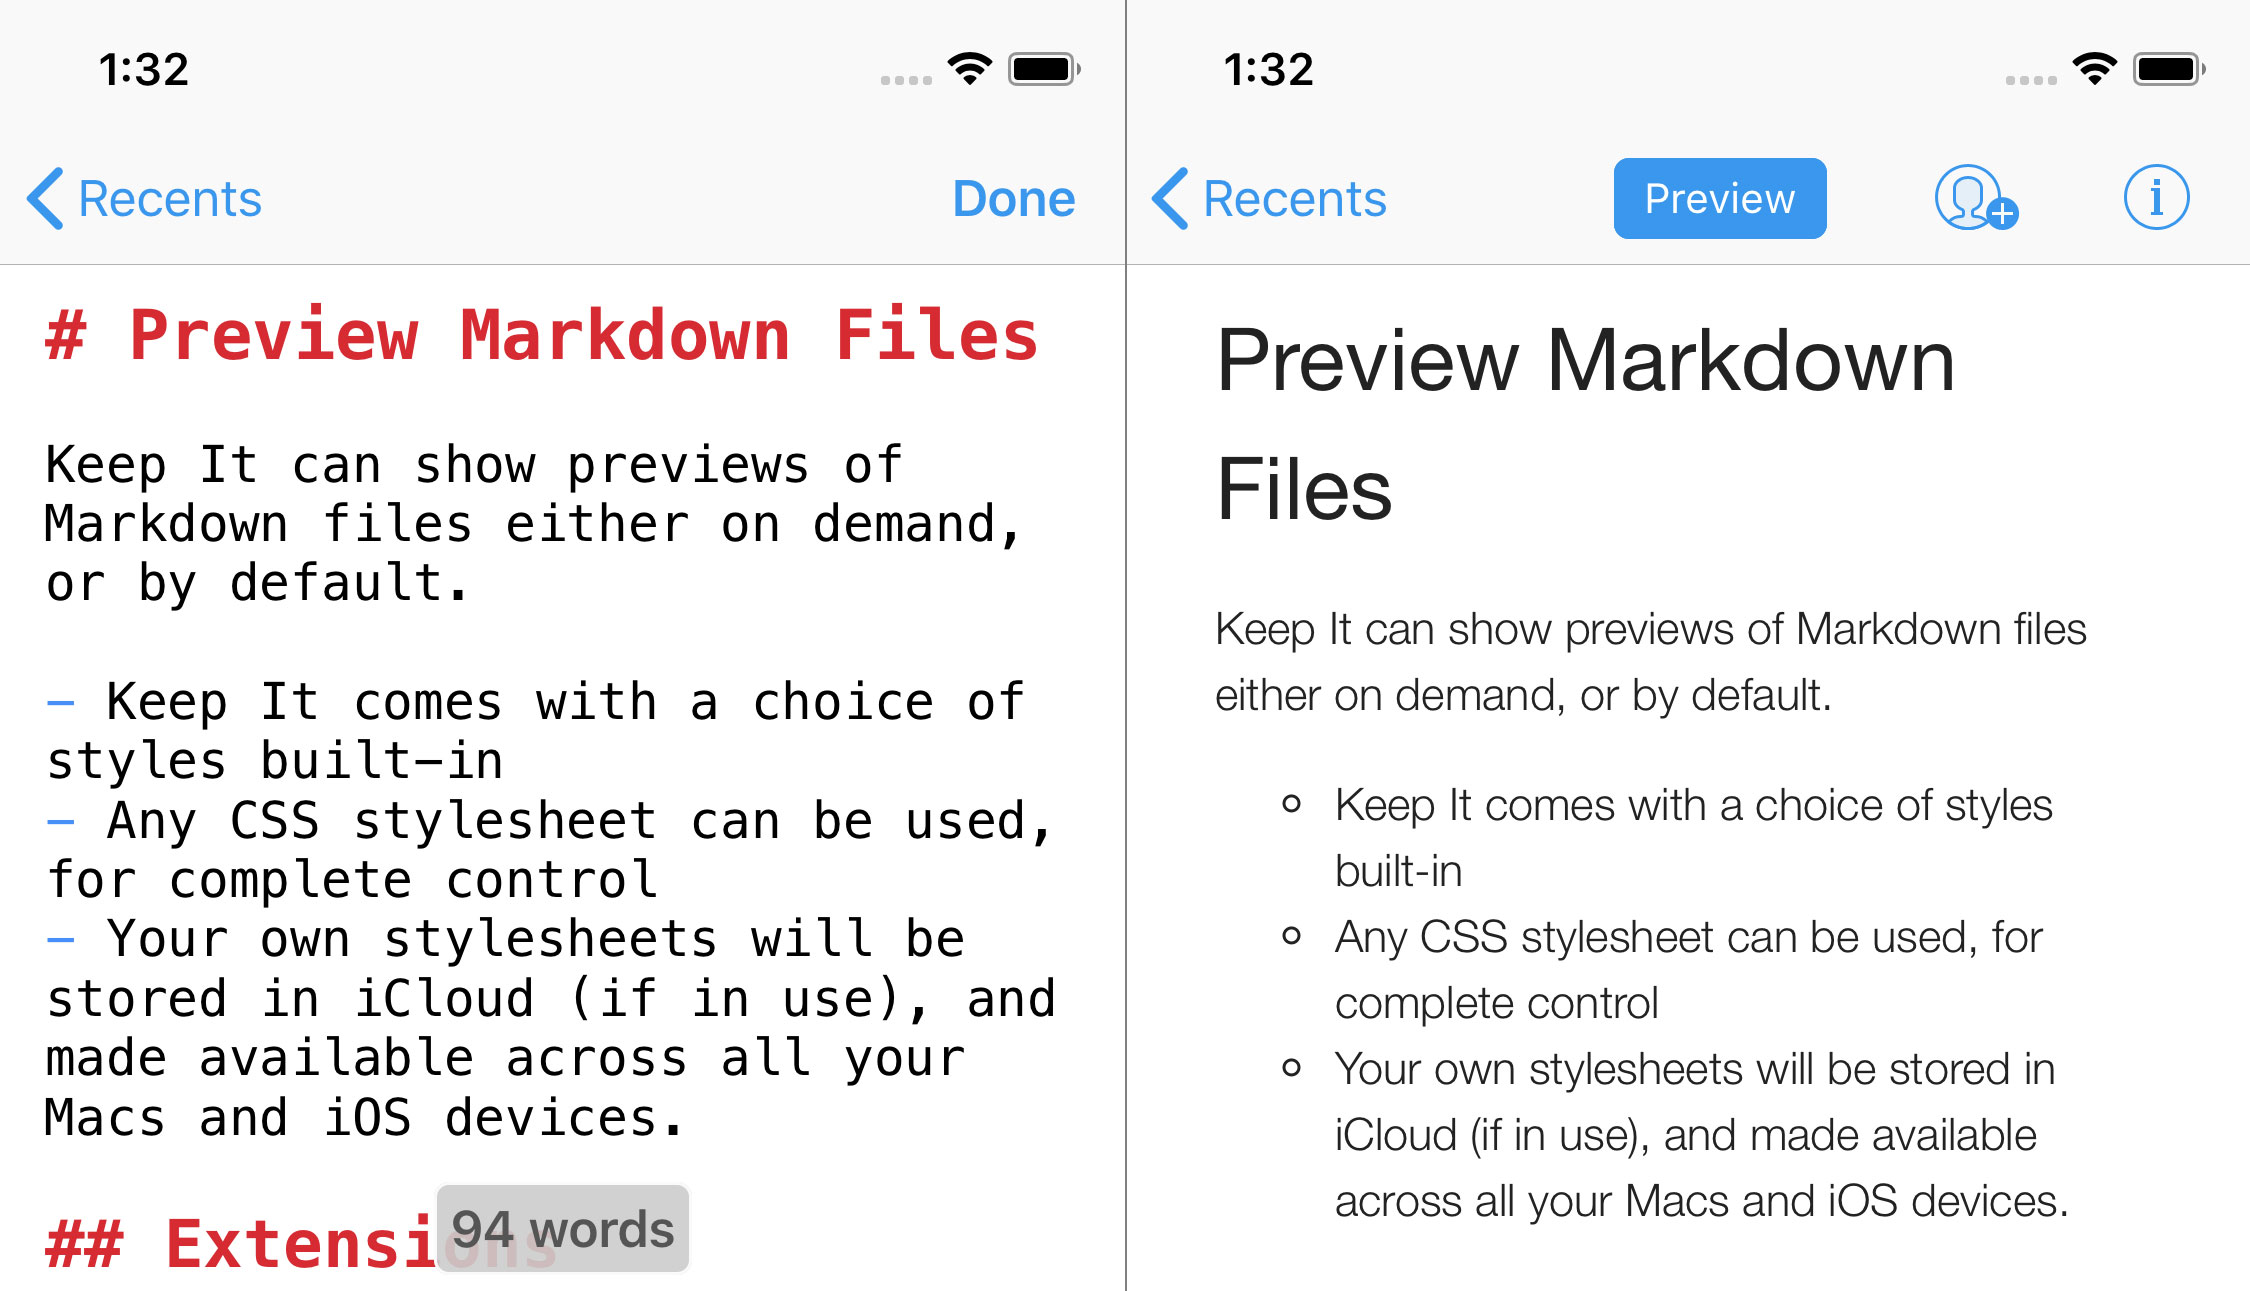 Markdown editor in Keep It for iPhone